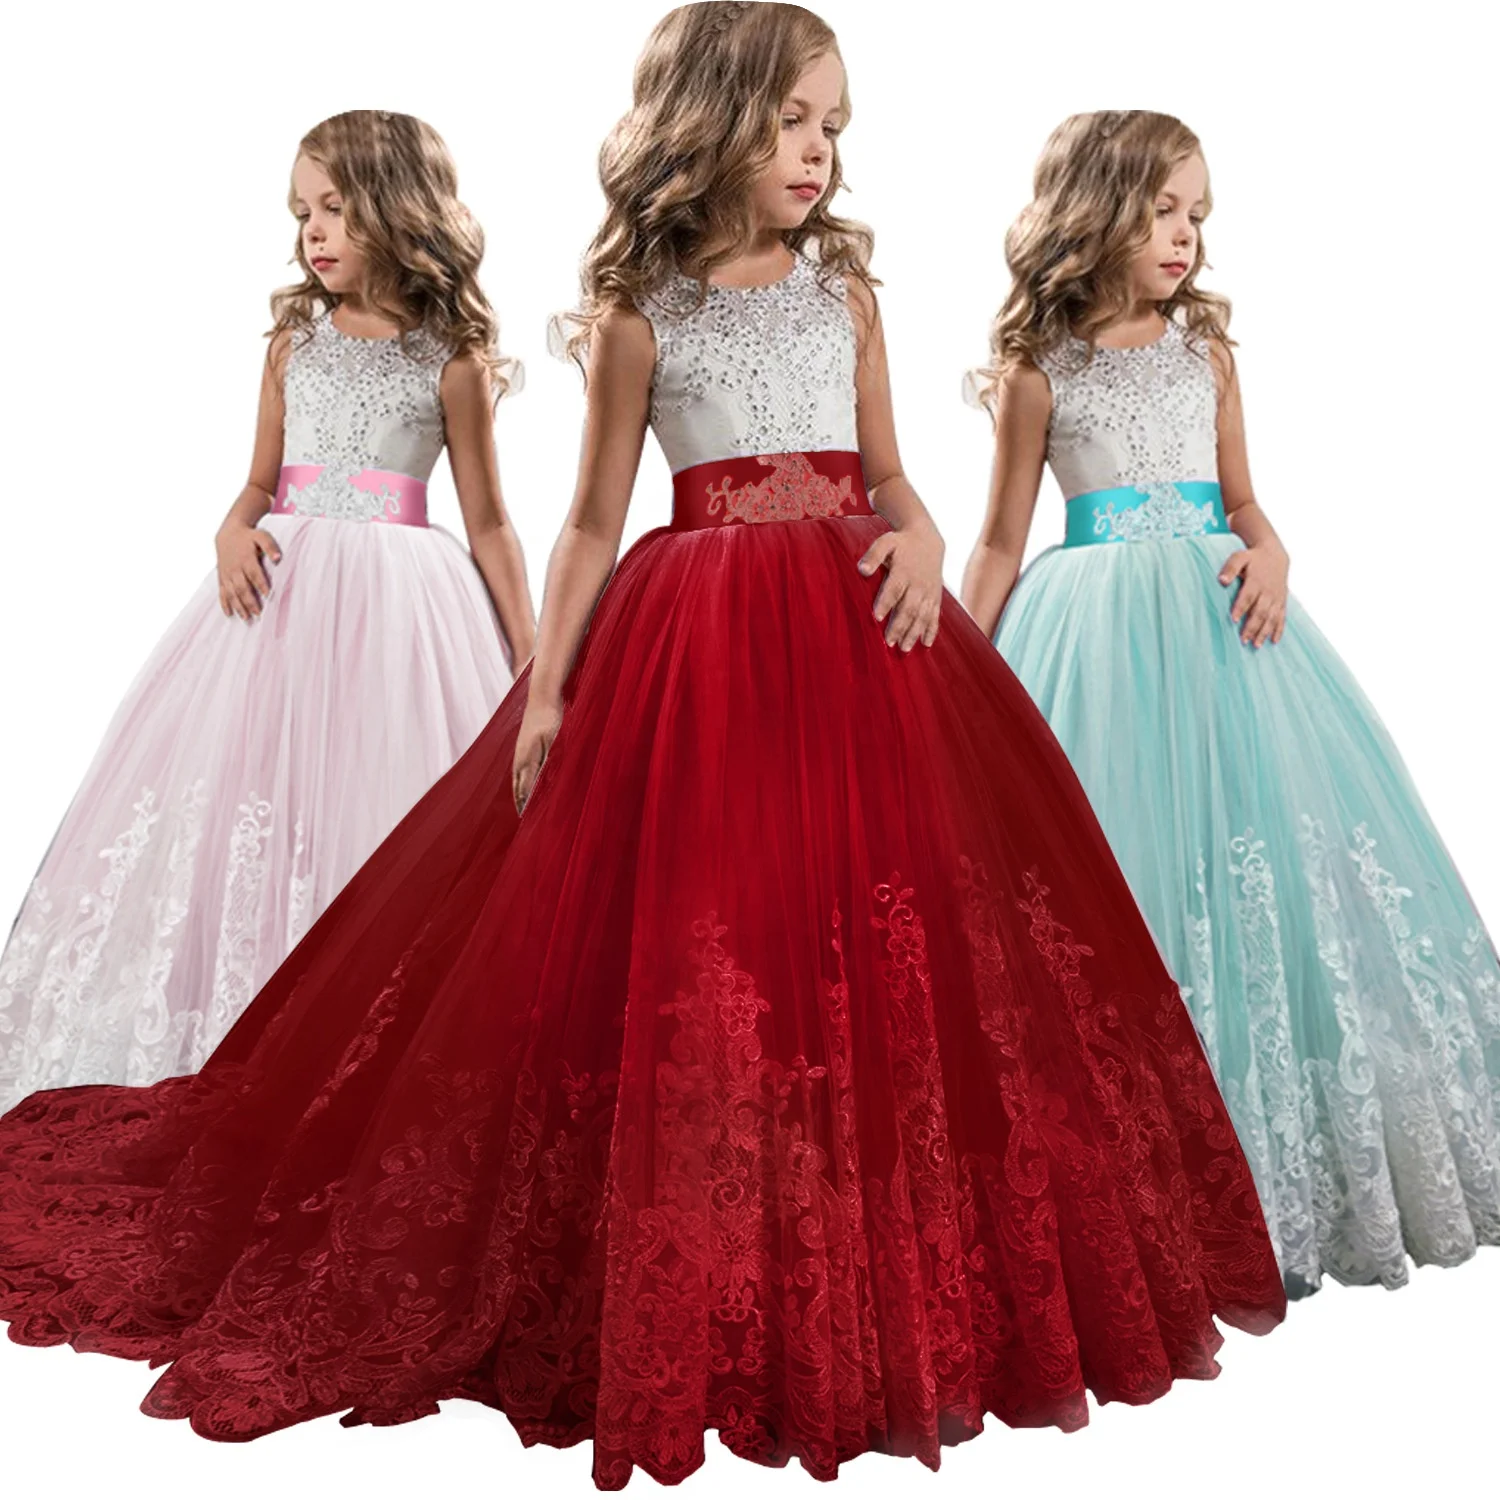 Wholesale 2 pieces girls tutu dress for prom party child fluffy gown for  girls wedding big girl birthday dresses for 12 Years From malibabacom